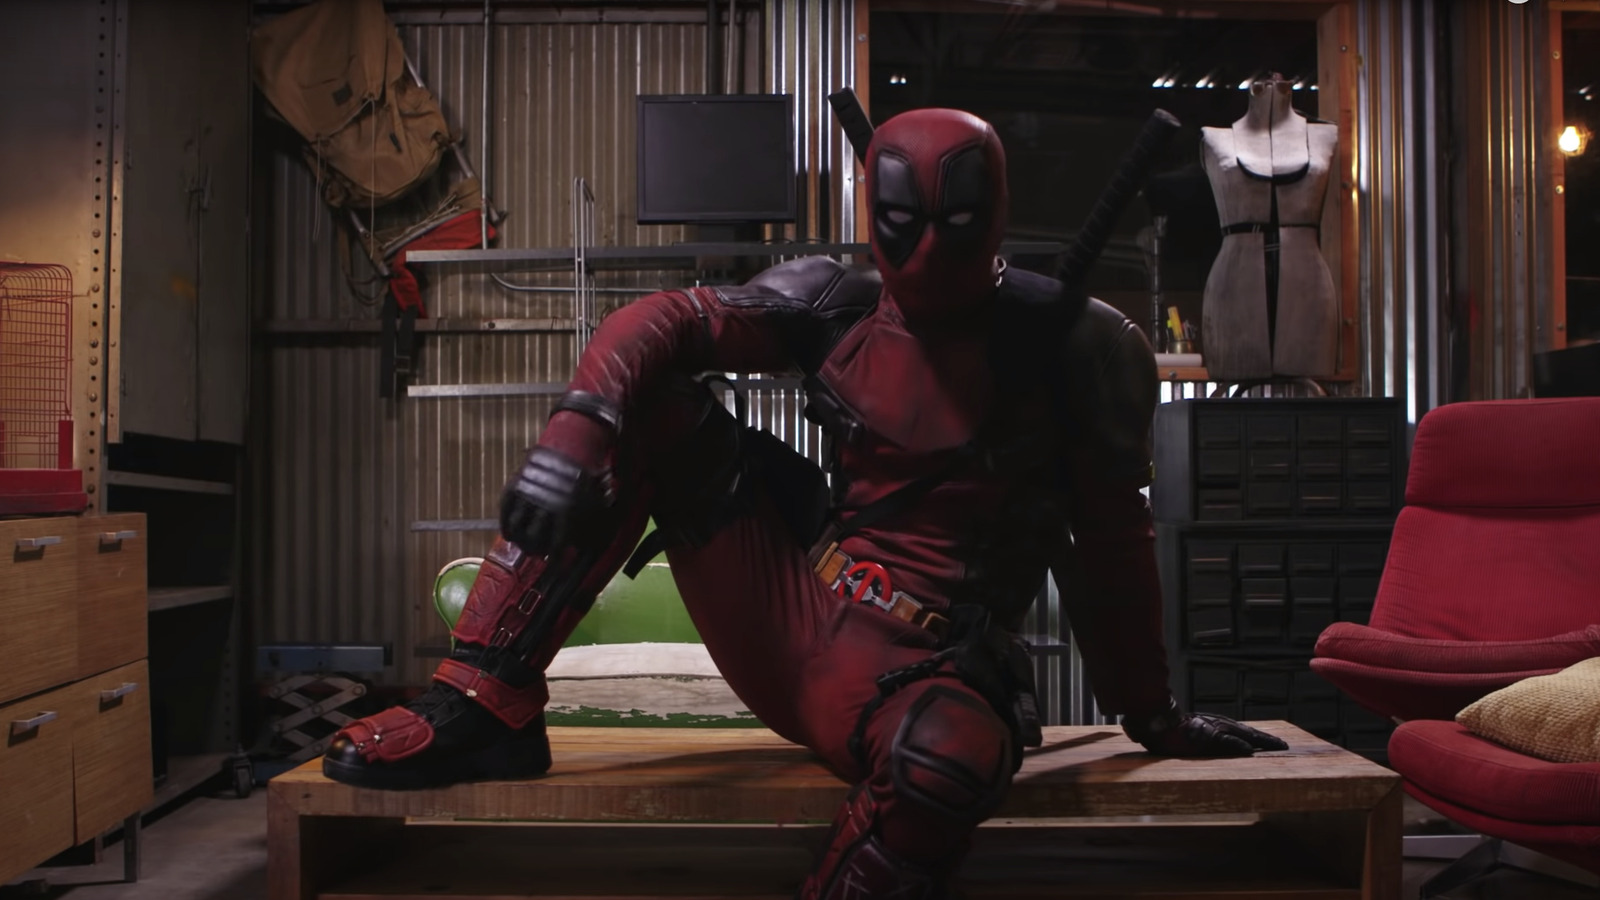 Justice League Gay Porn Deadpool - Superhero Porn Parodies Are Giving The Fans Exactly What They Want, In More  Ways Than One